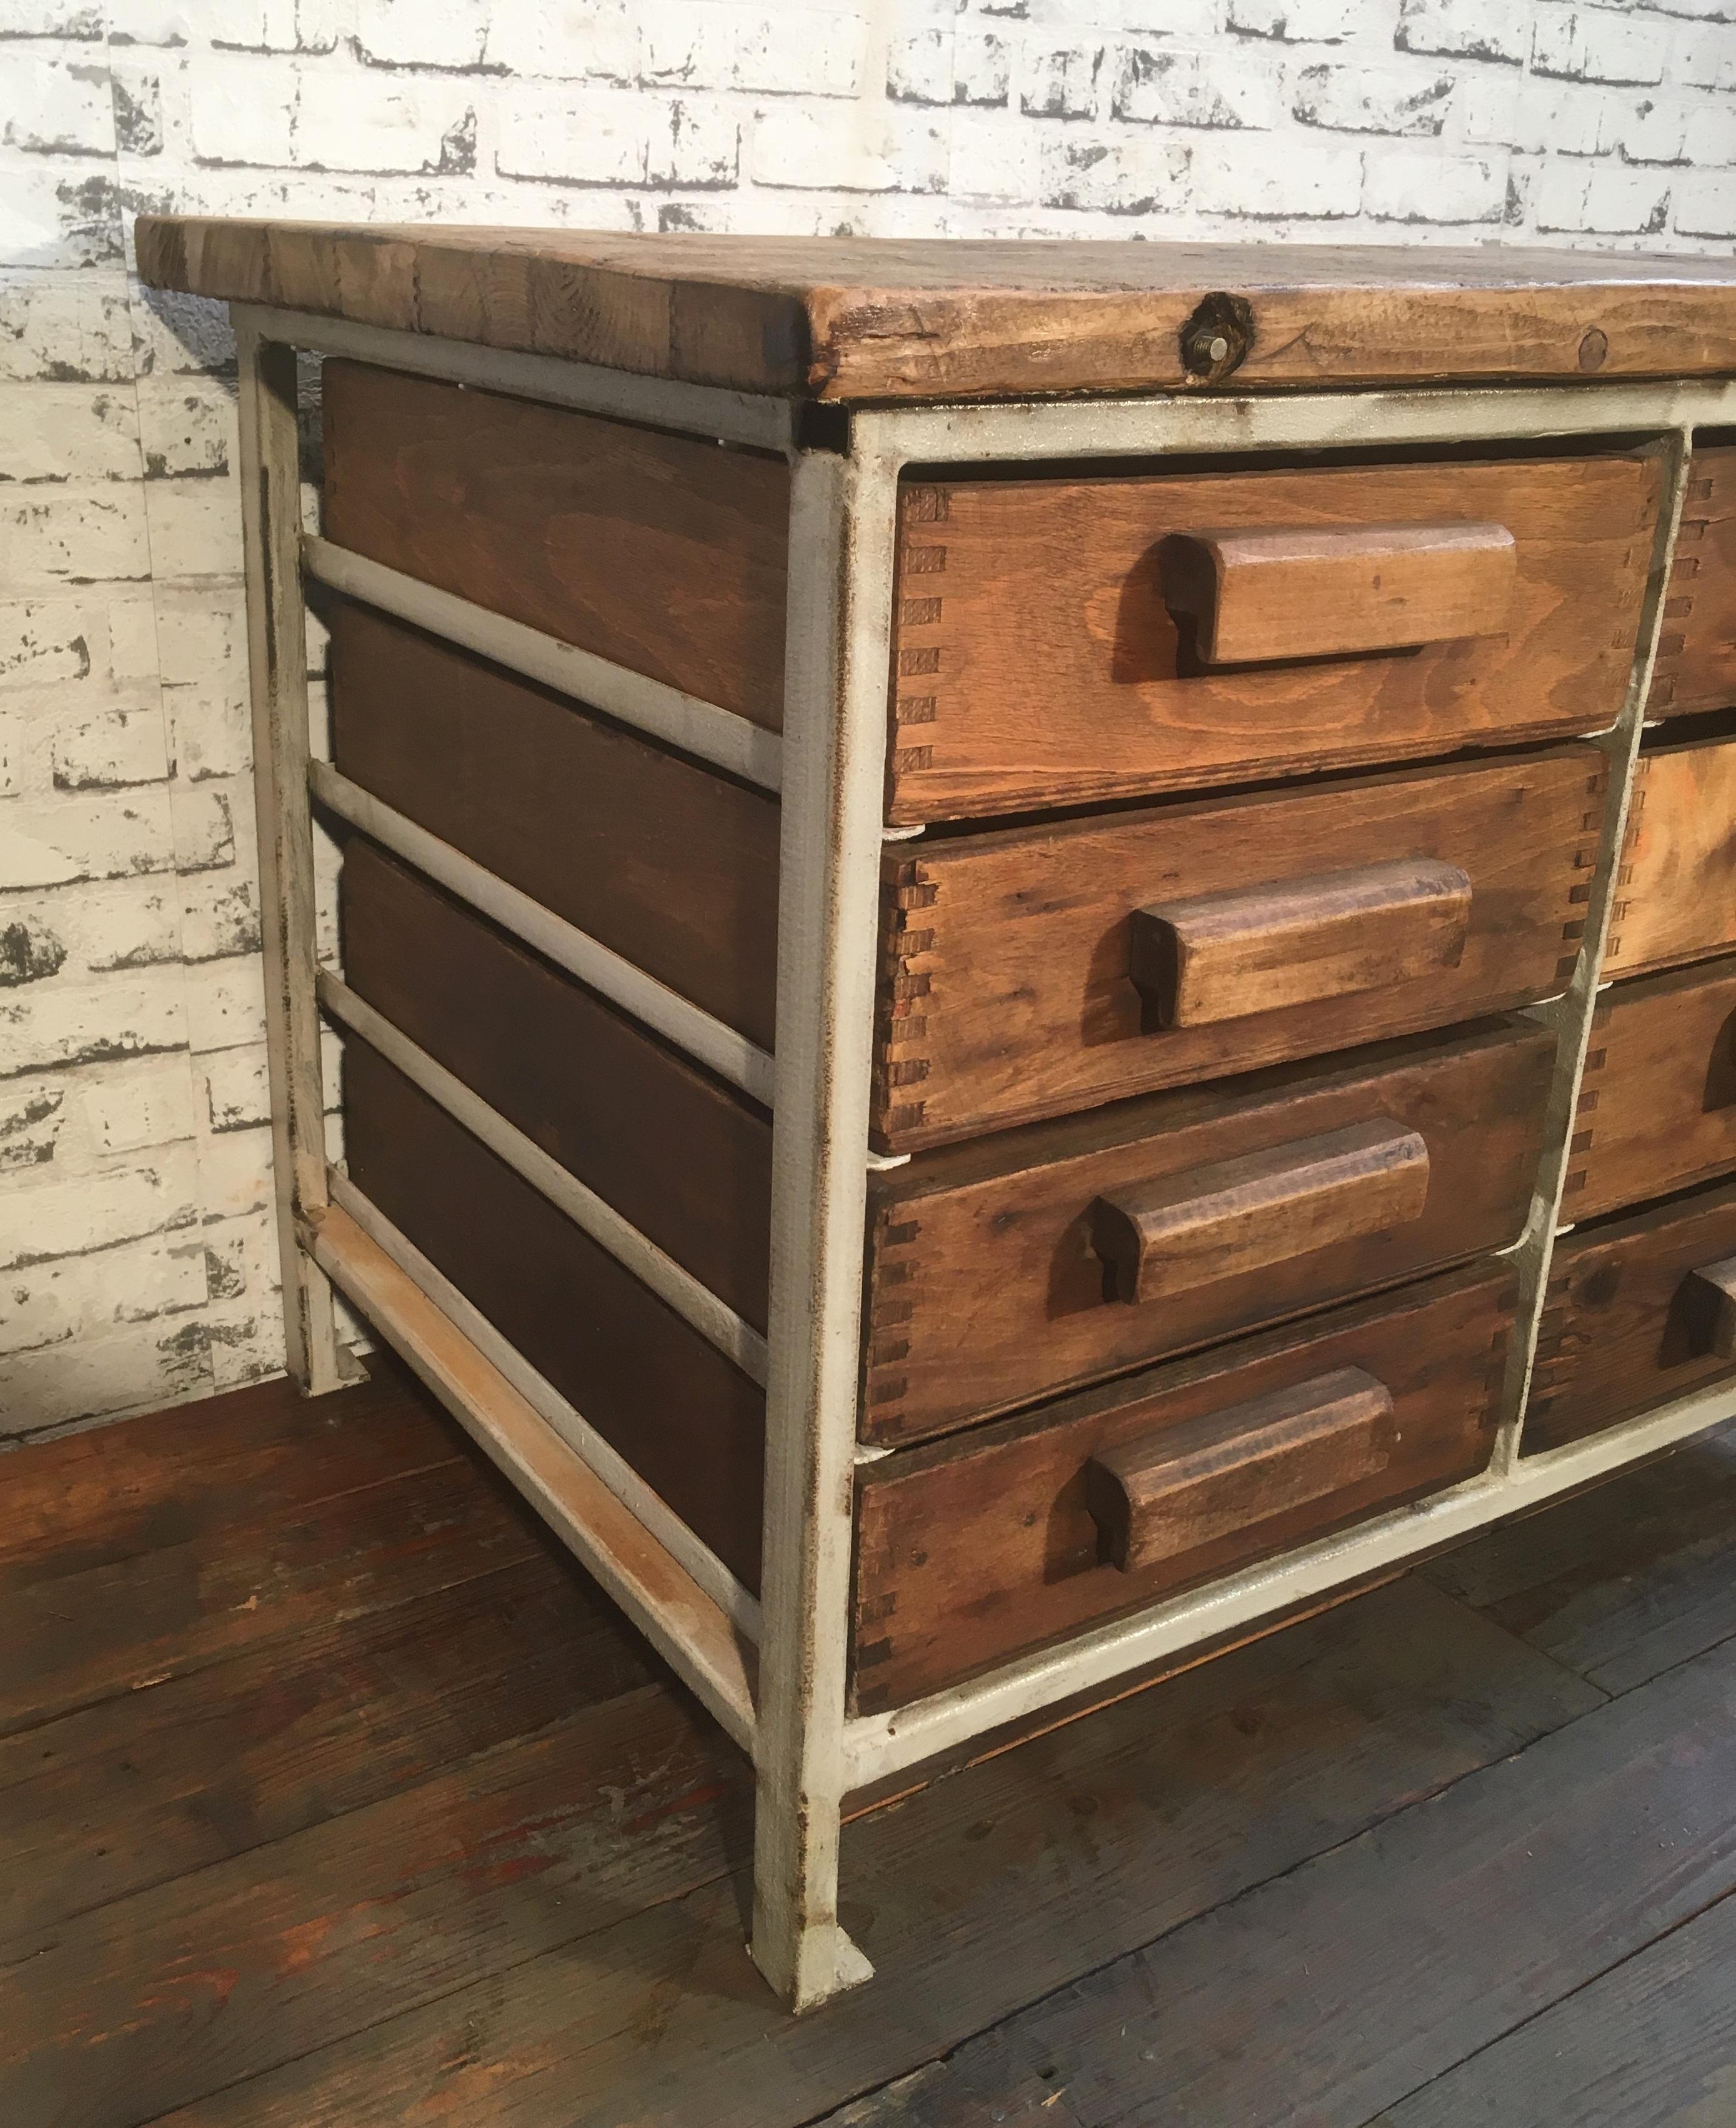 This vintage Industrial chest of drawers was made in the 1950s. It features old wooden plank ,white iron construction, eight drawers made of wood. Very good vintage condition.
Drawer dimensions: Width 33.5 cm, depth 48.5 cm, height 9.5 cm
Weight: